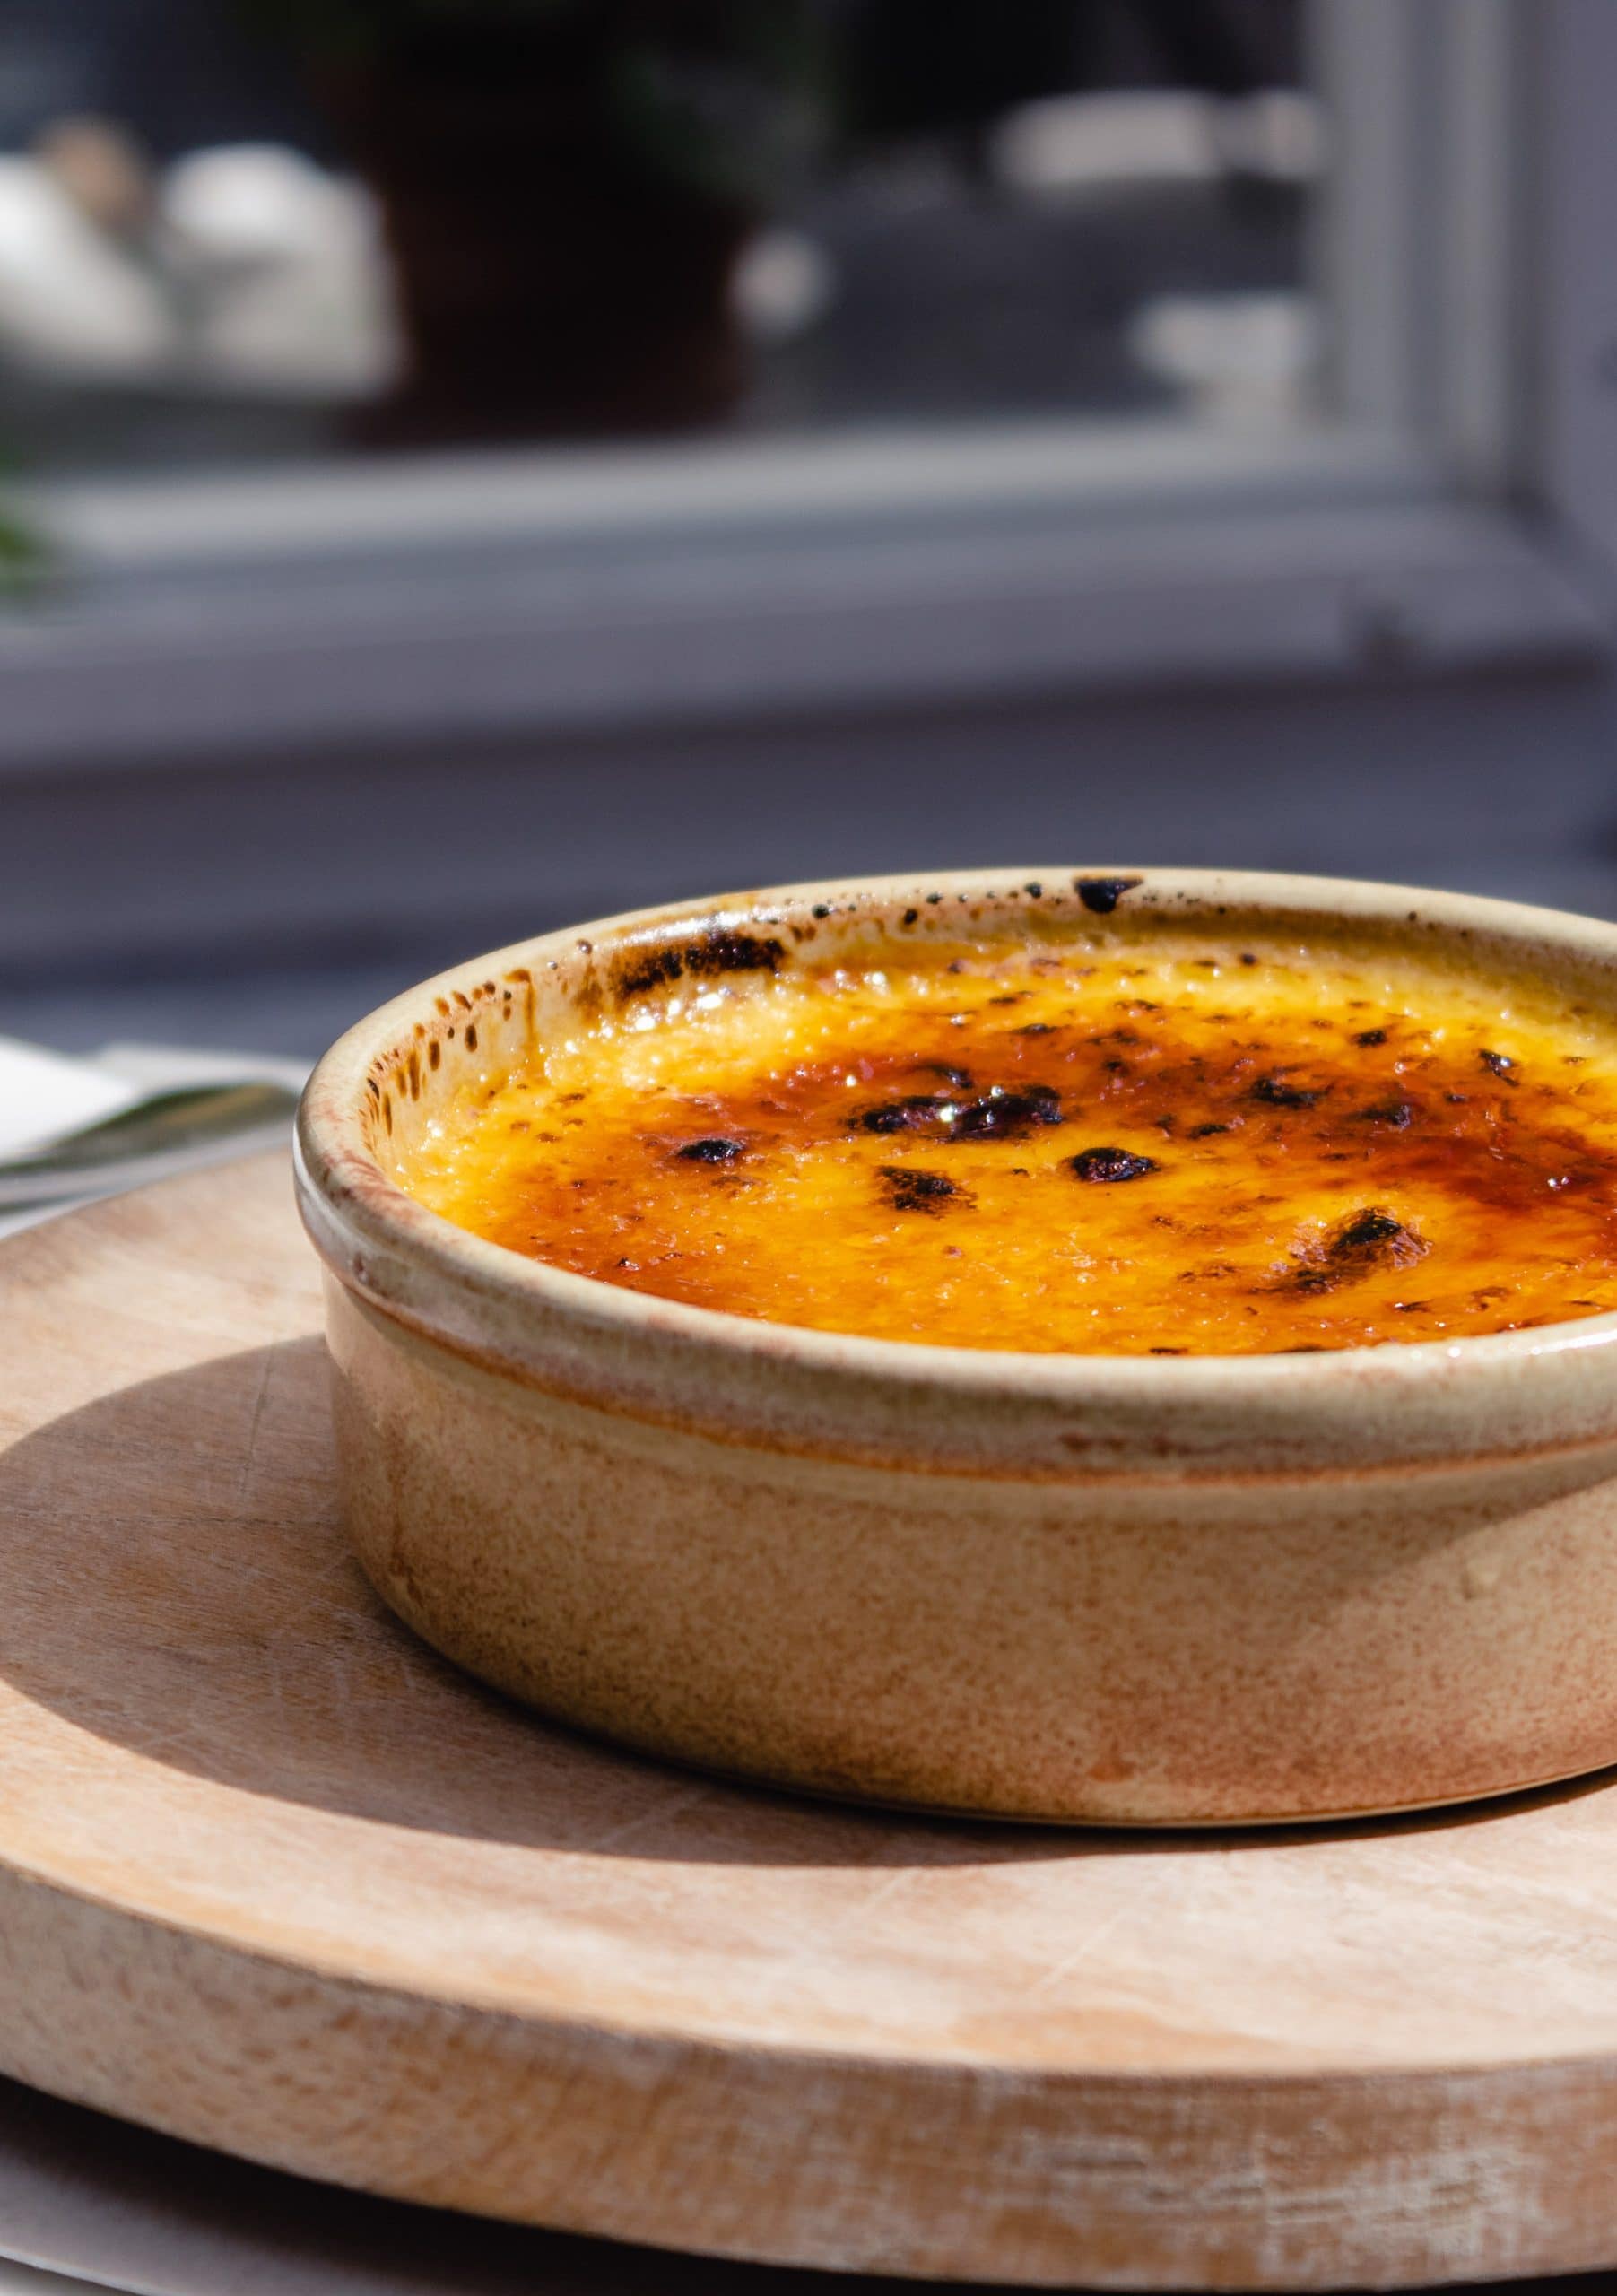 0038-2021-Gees-Restaurant-Bar-Oxford-High-Res-Pudding-Creme-Brulee-Web-Hero-aspect-ratio-1803-2560